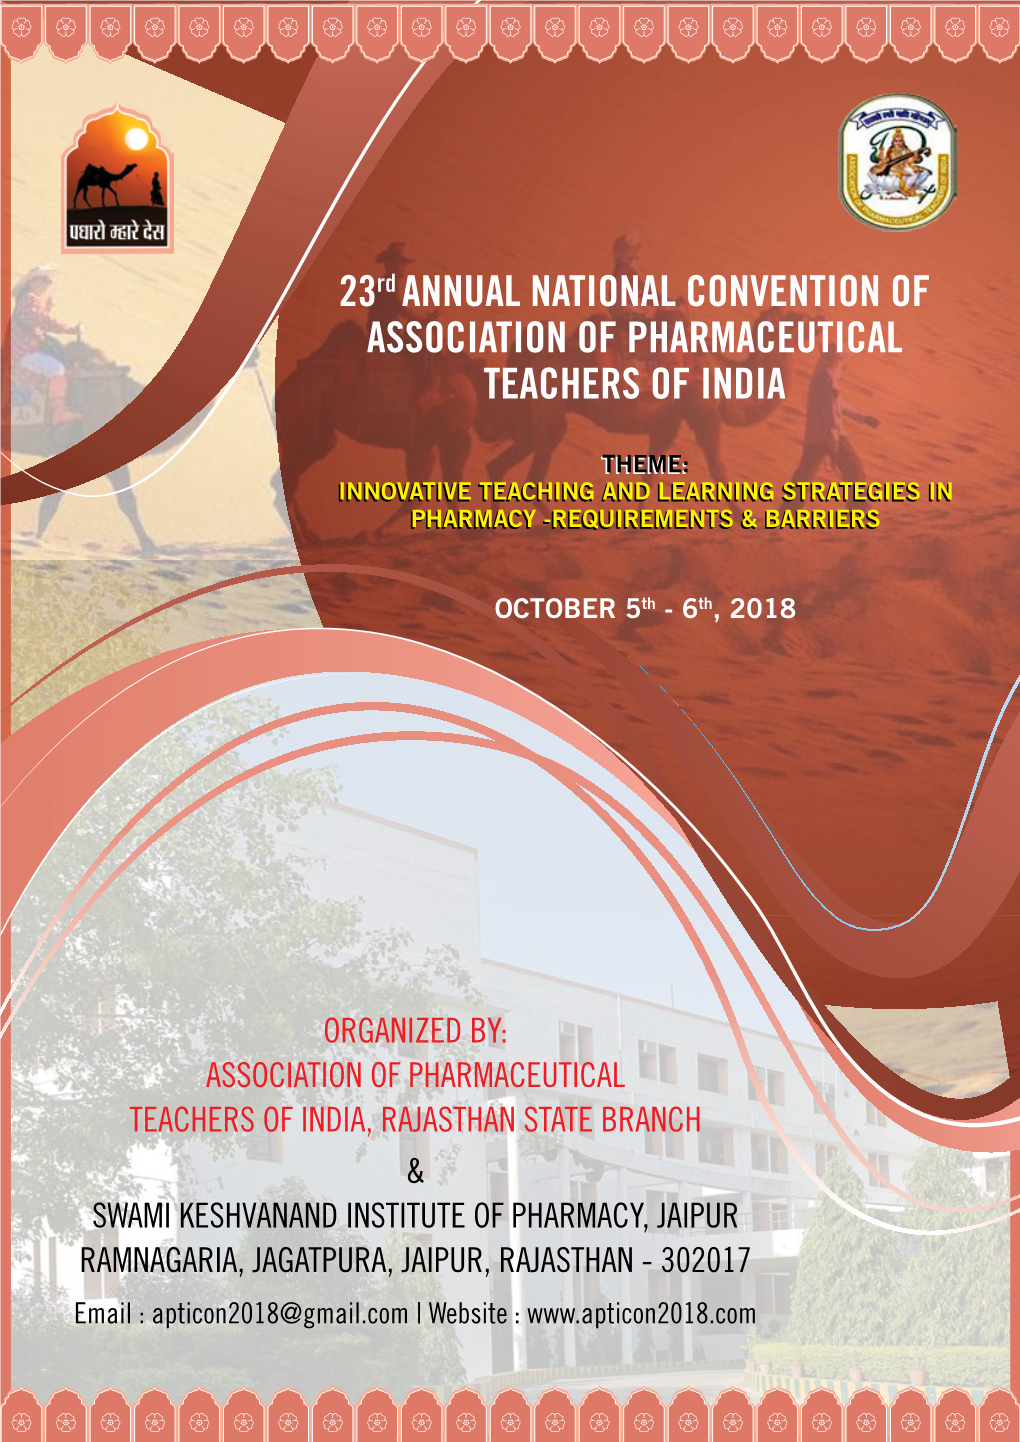 23Rd ANNUAL NATIONAL CONVENTION of ASSOCIATION of PHARMACEUTICAL TEACHERS of INDIA